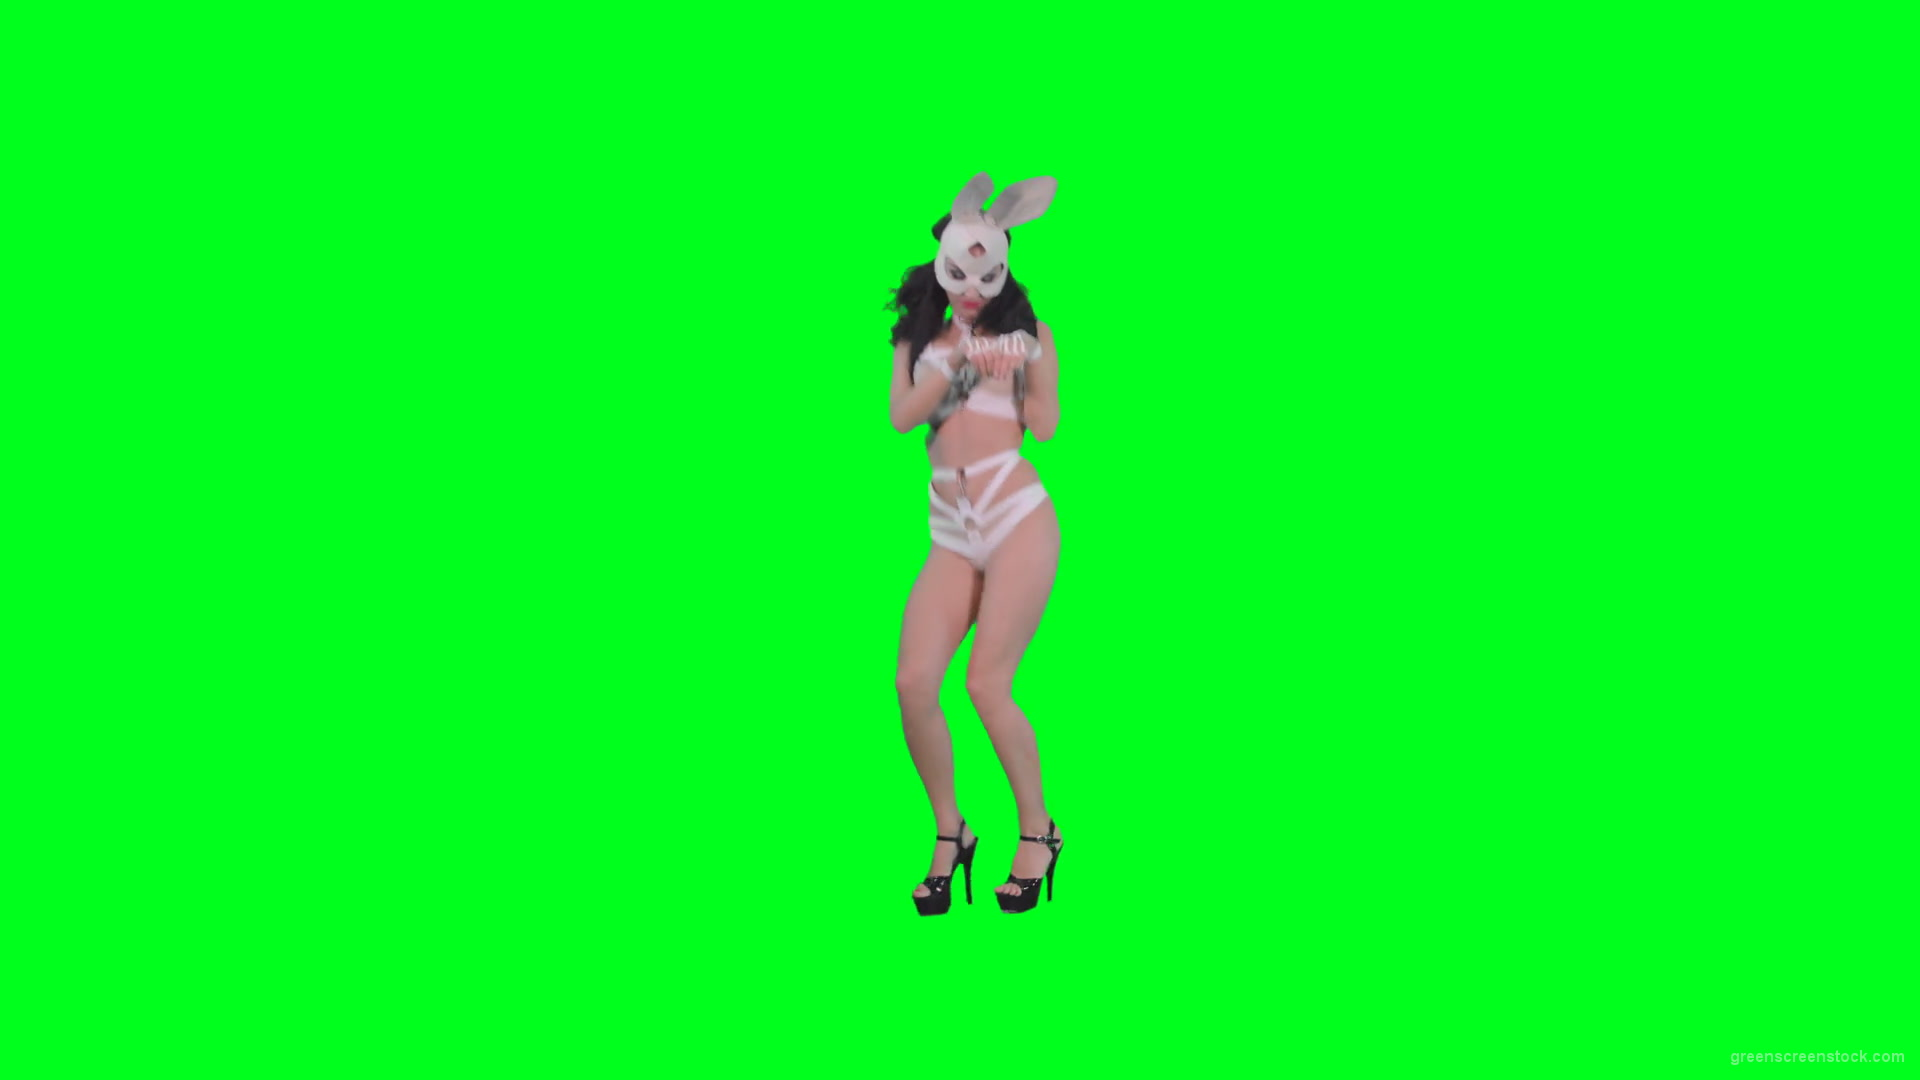 Sexy-woman-jumping-in-Go-Go-style-in-rabbit-mask-on-green-screen-4K-Video-Footage-1920_008 Green Screen Stock